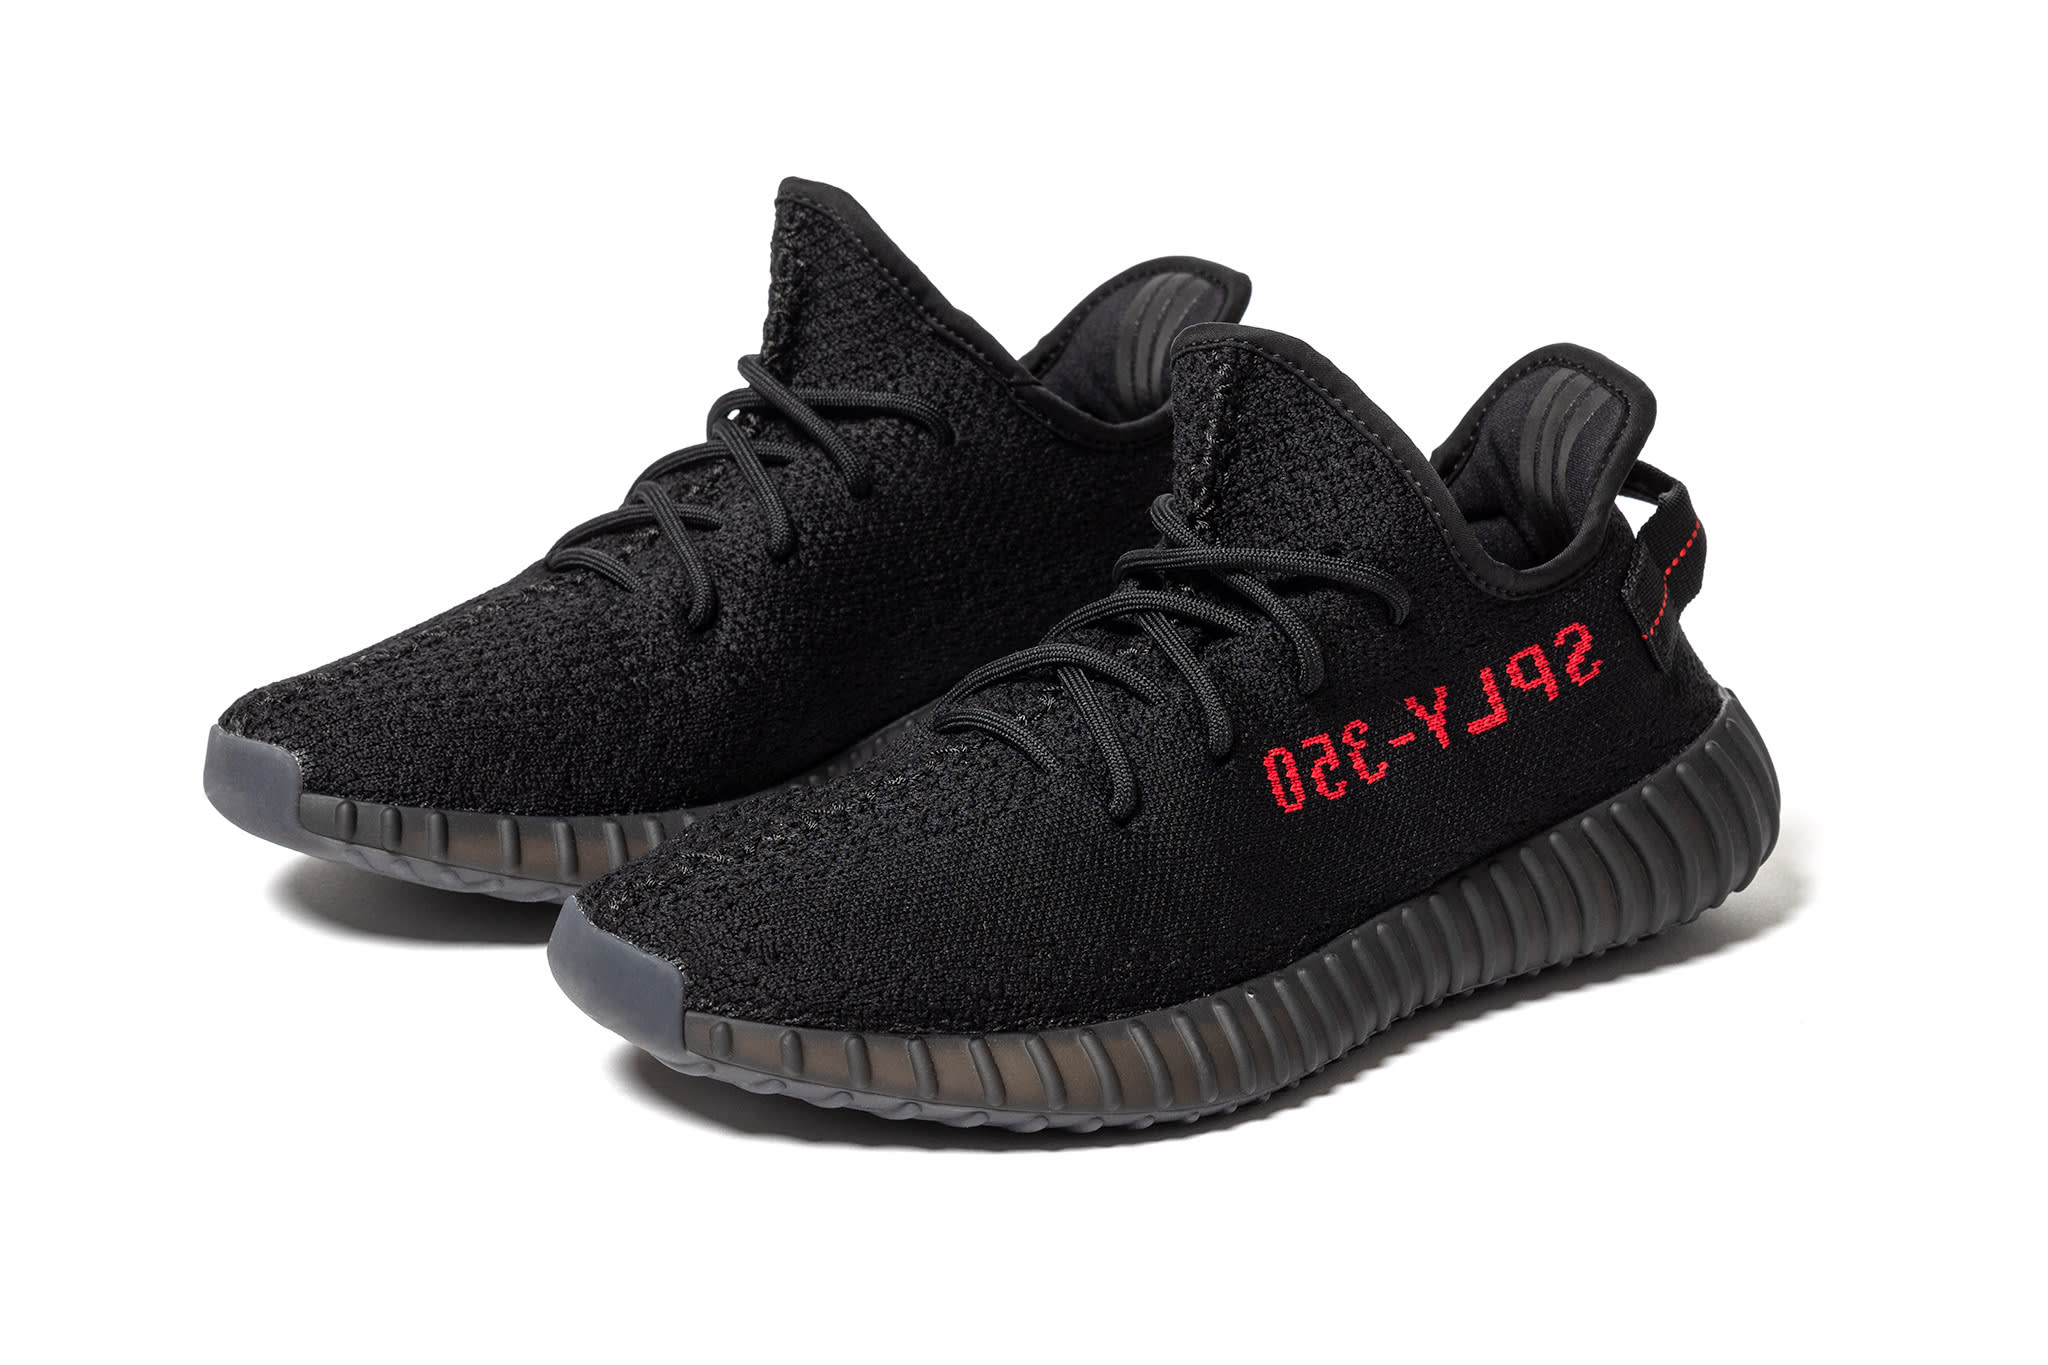 adidas Yeezy 350 V2 'Bred' | Date: 12.05.20 | HAVEN